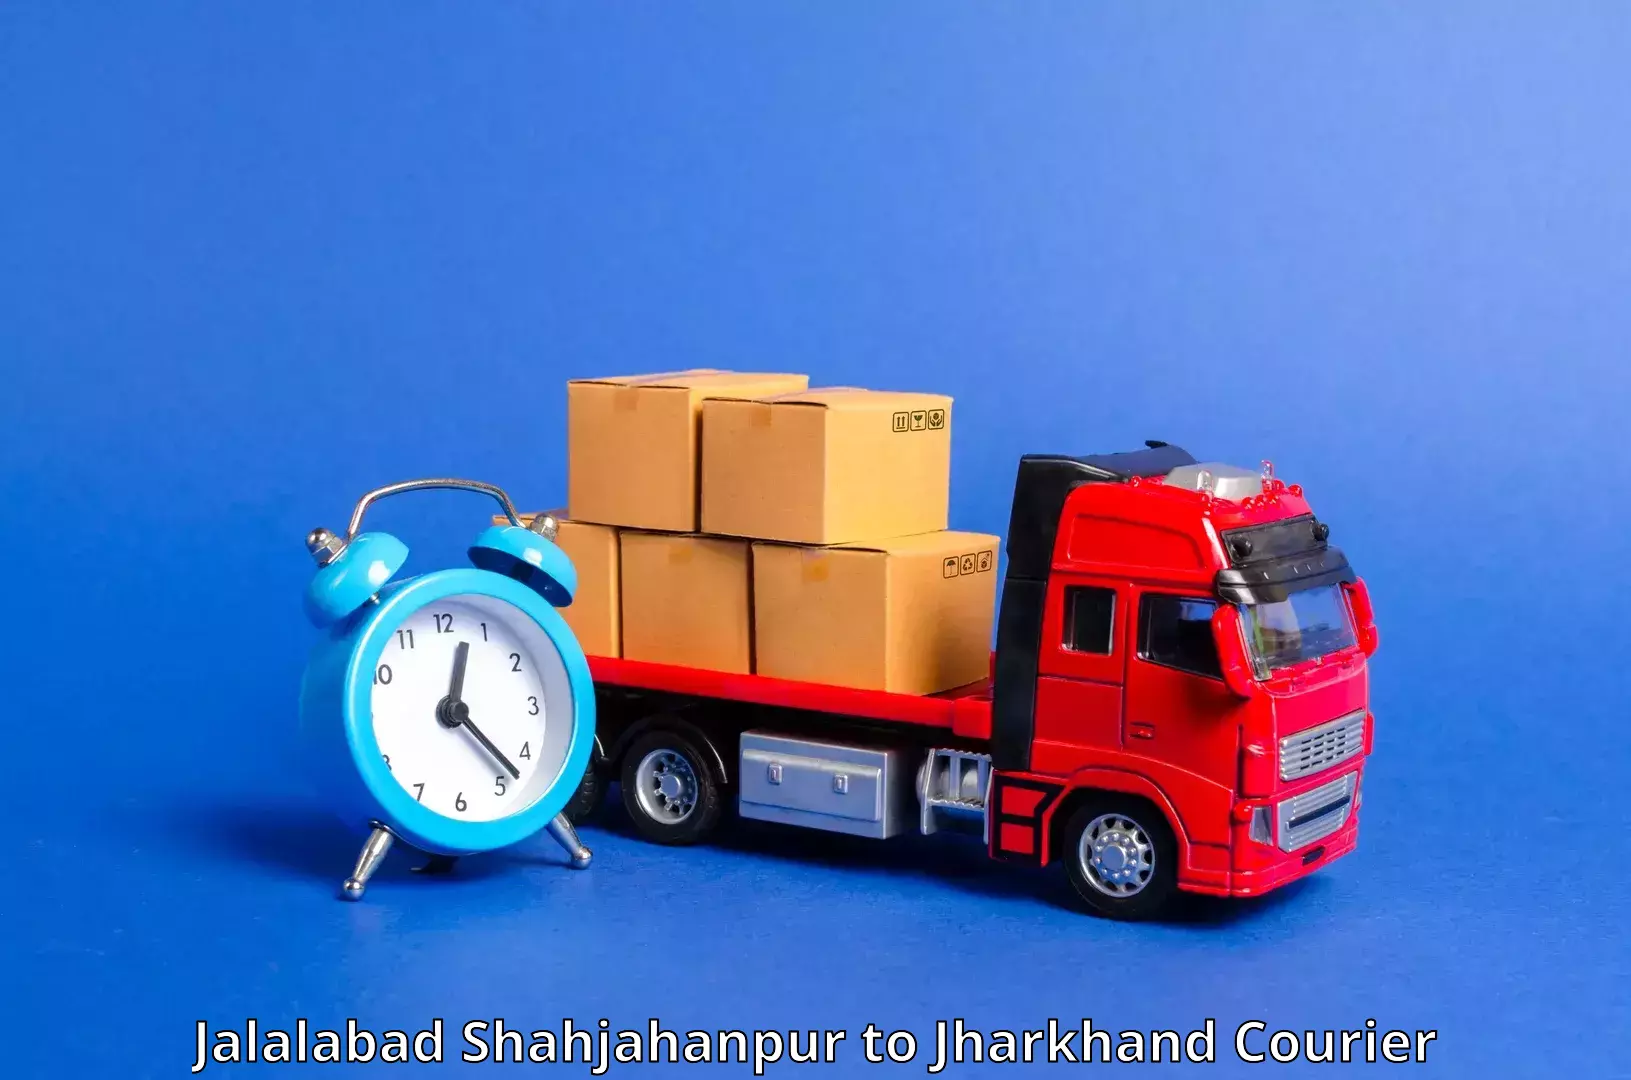 Multi-carrier shipping Jalalabad Shahjahanpur to Jamshedpur